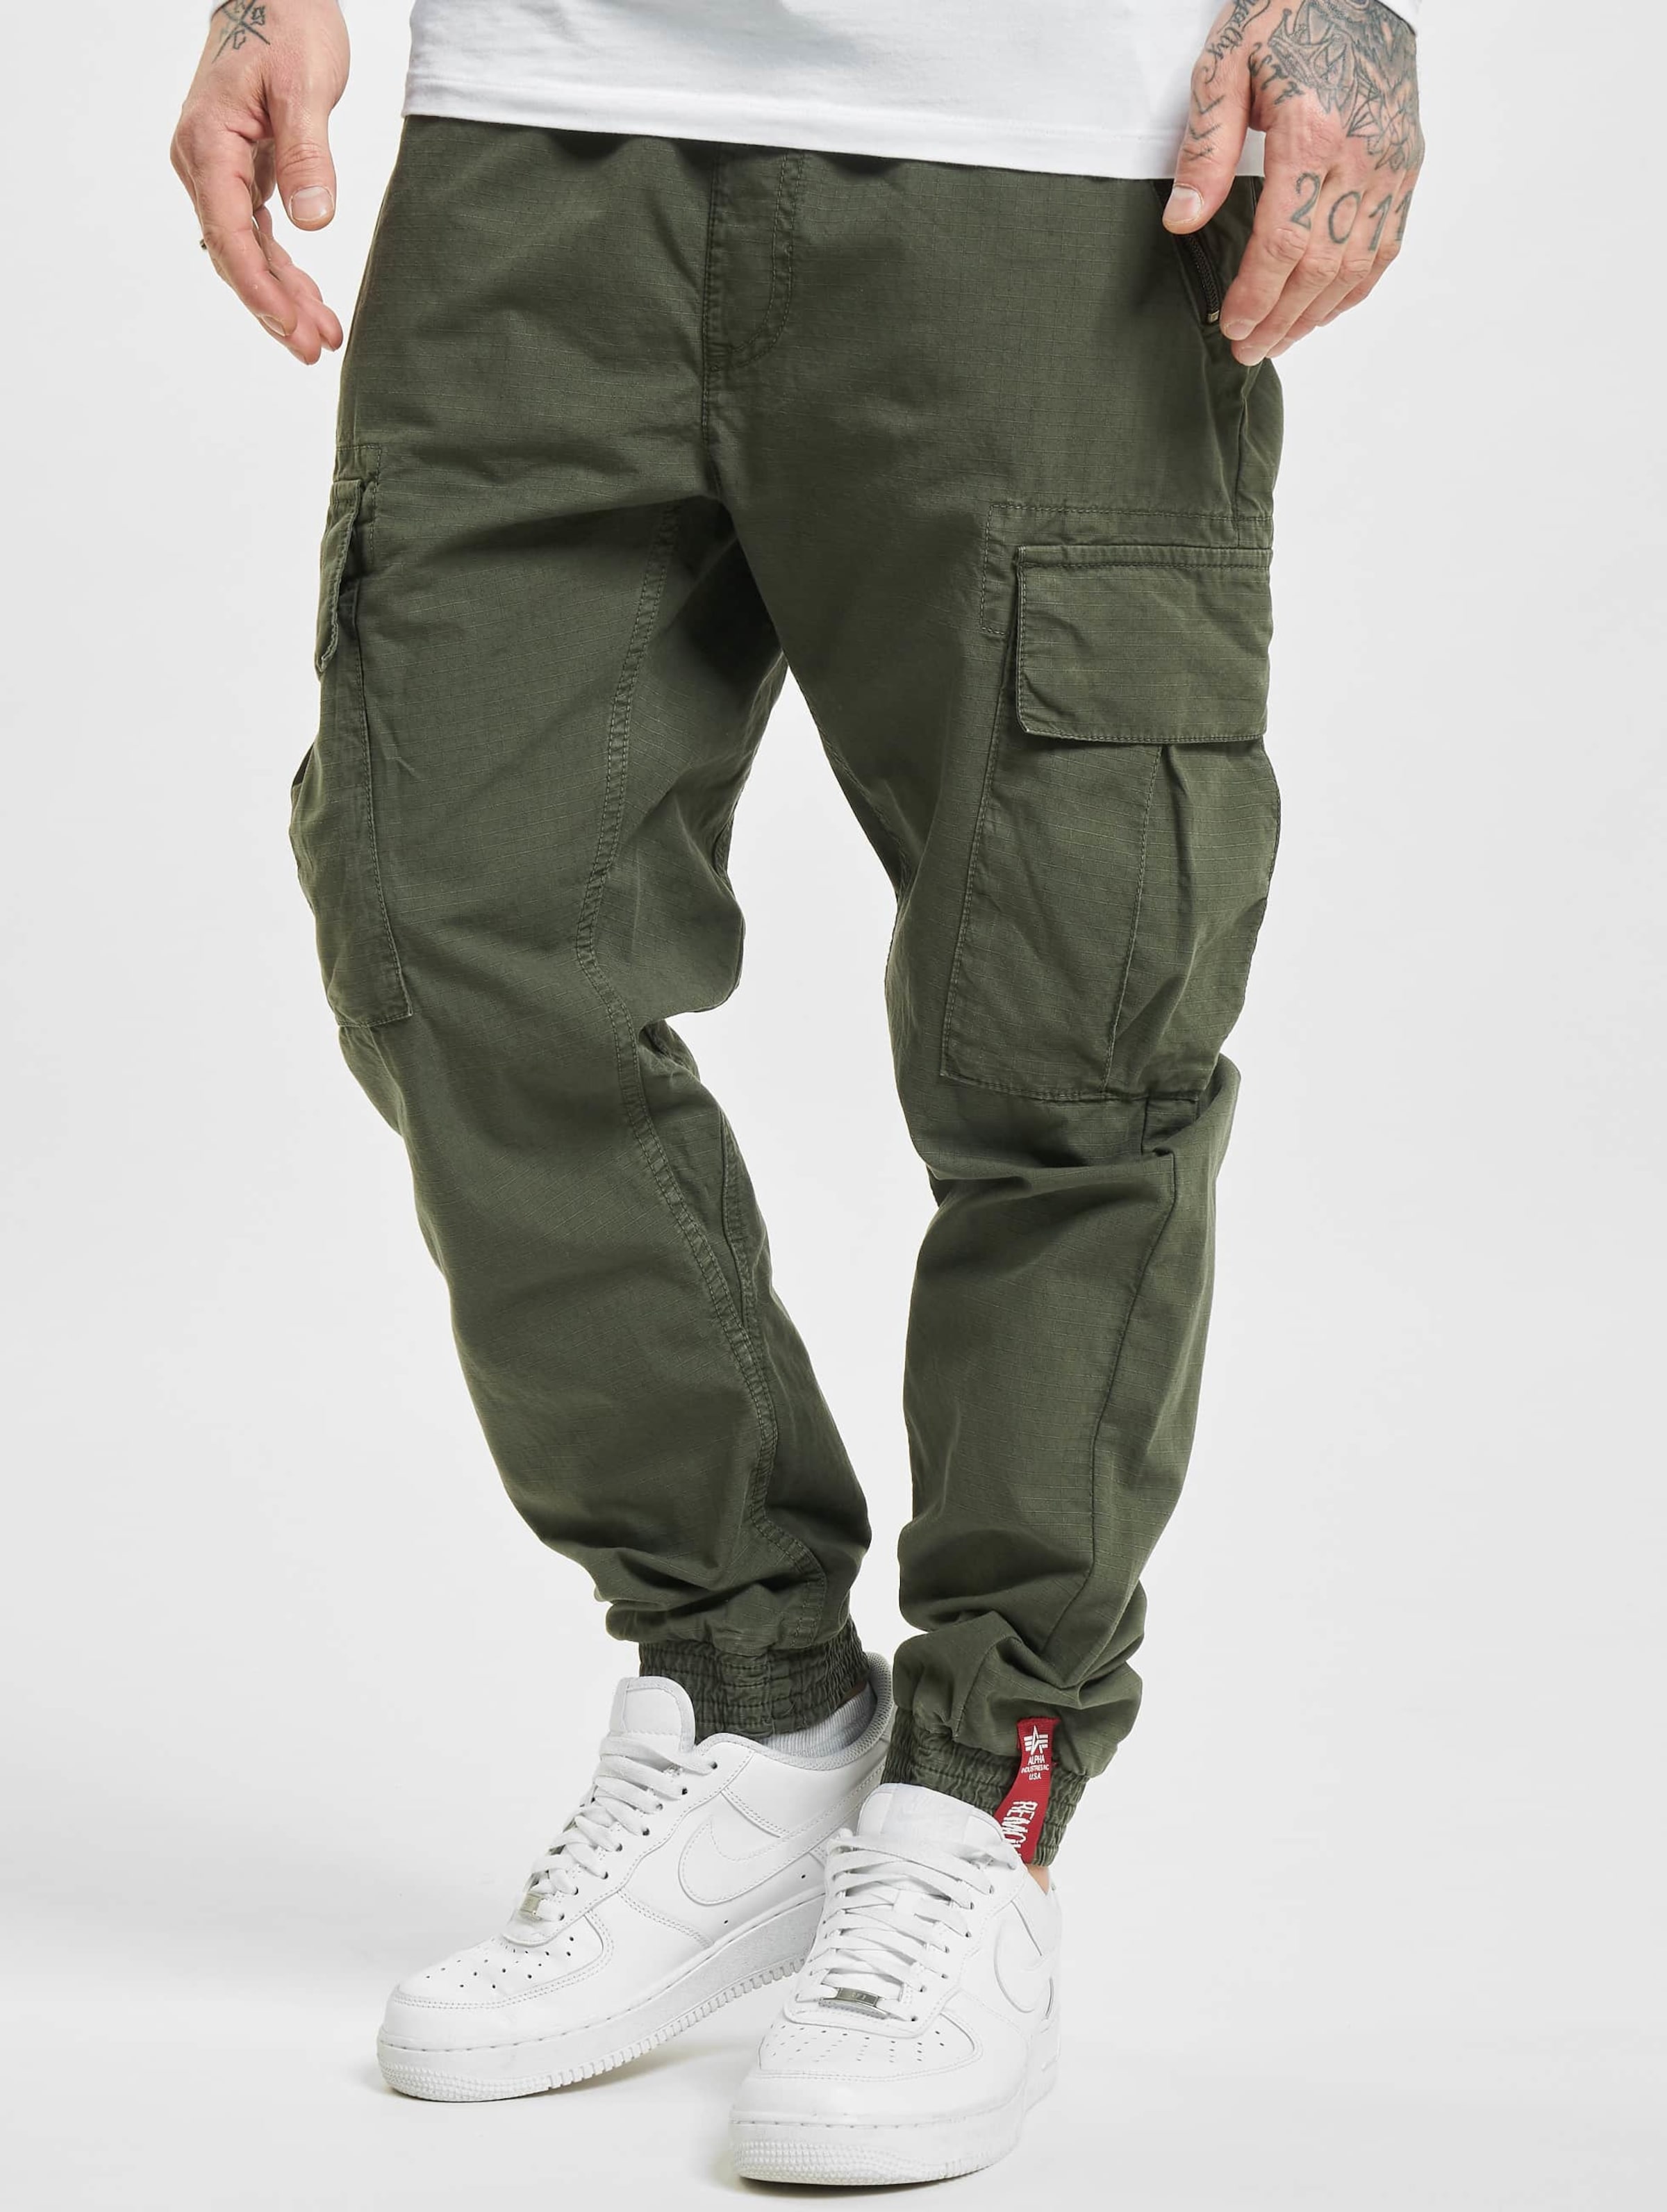 Alpha Industries M-65 Cargo Pant | Urban Outfitters Japan - Clothing,  Music, Home & Accessories